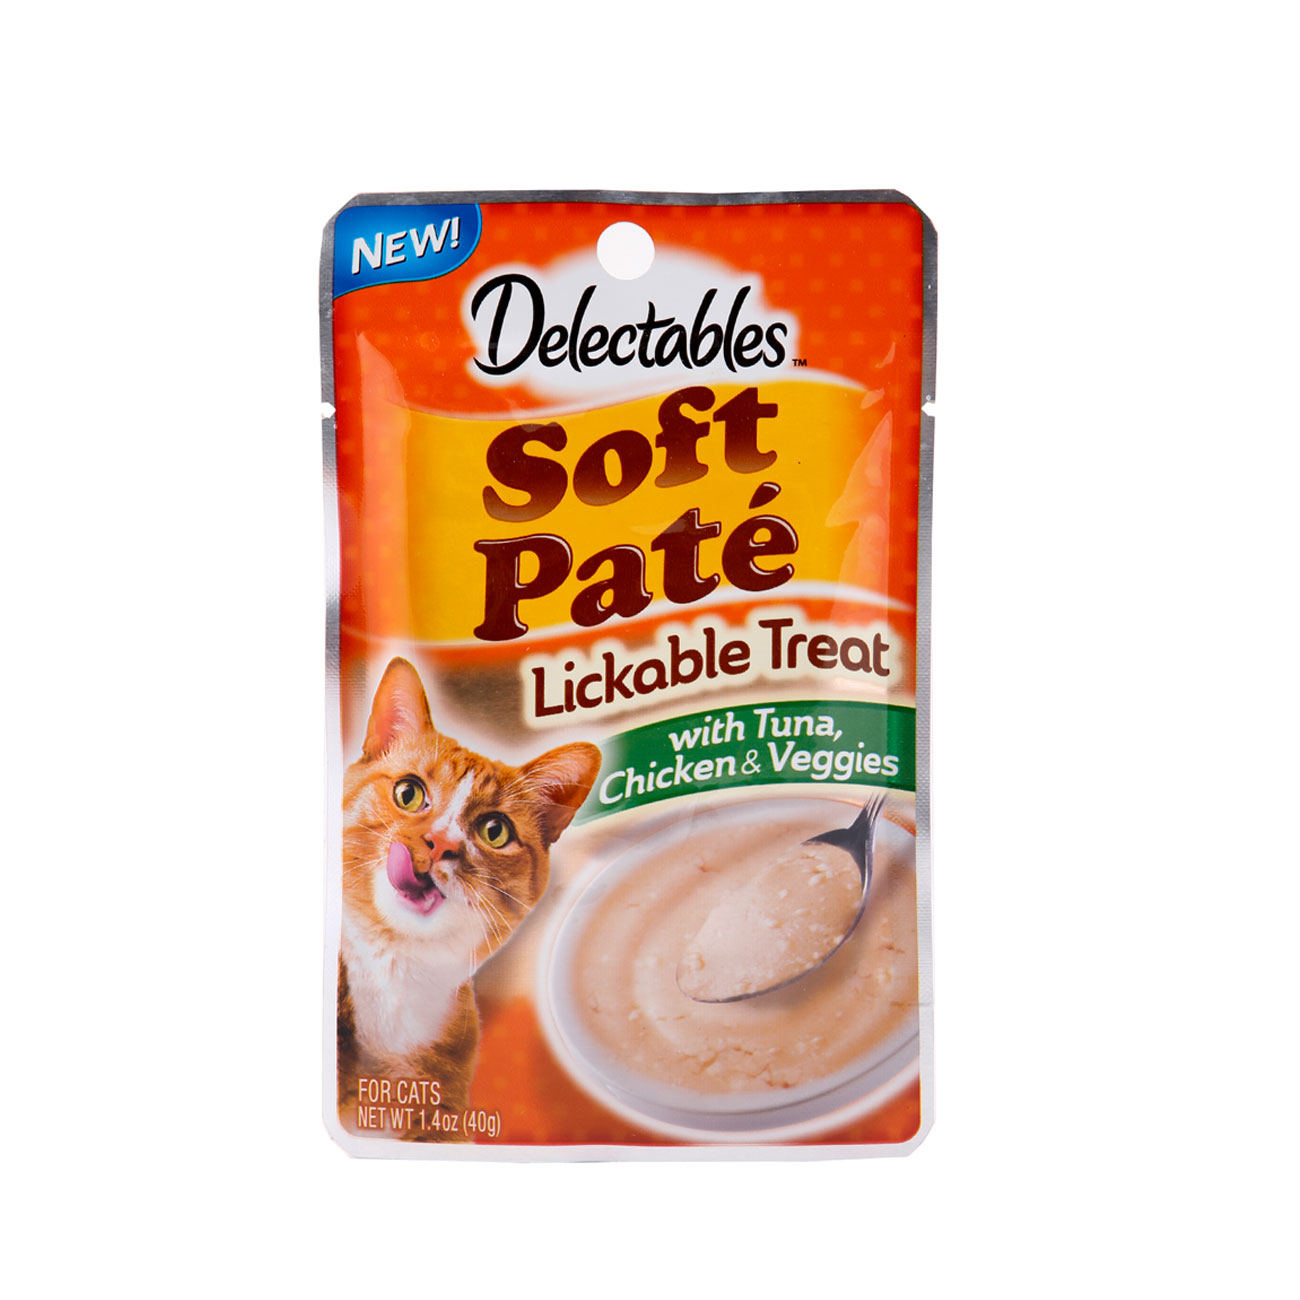 Hartz delectables lickable treat pate with tuna, chicken and veggies. Front of package has an image of a cat and a bowl of lickable treat pate.